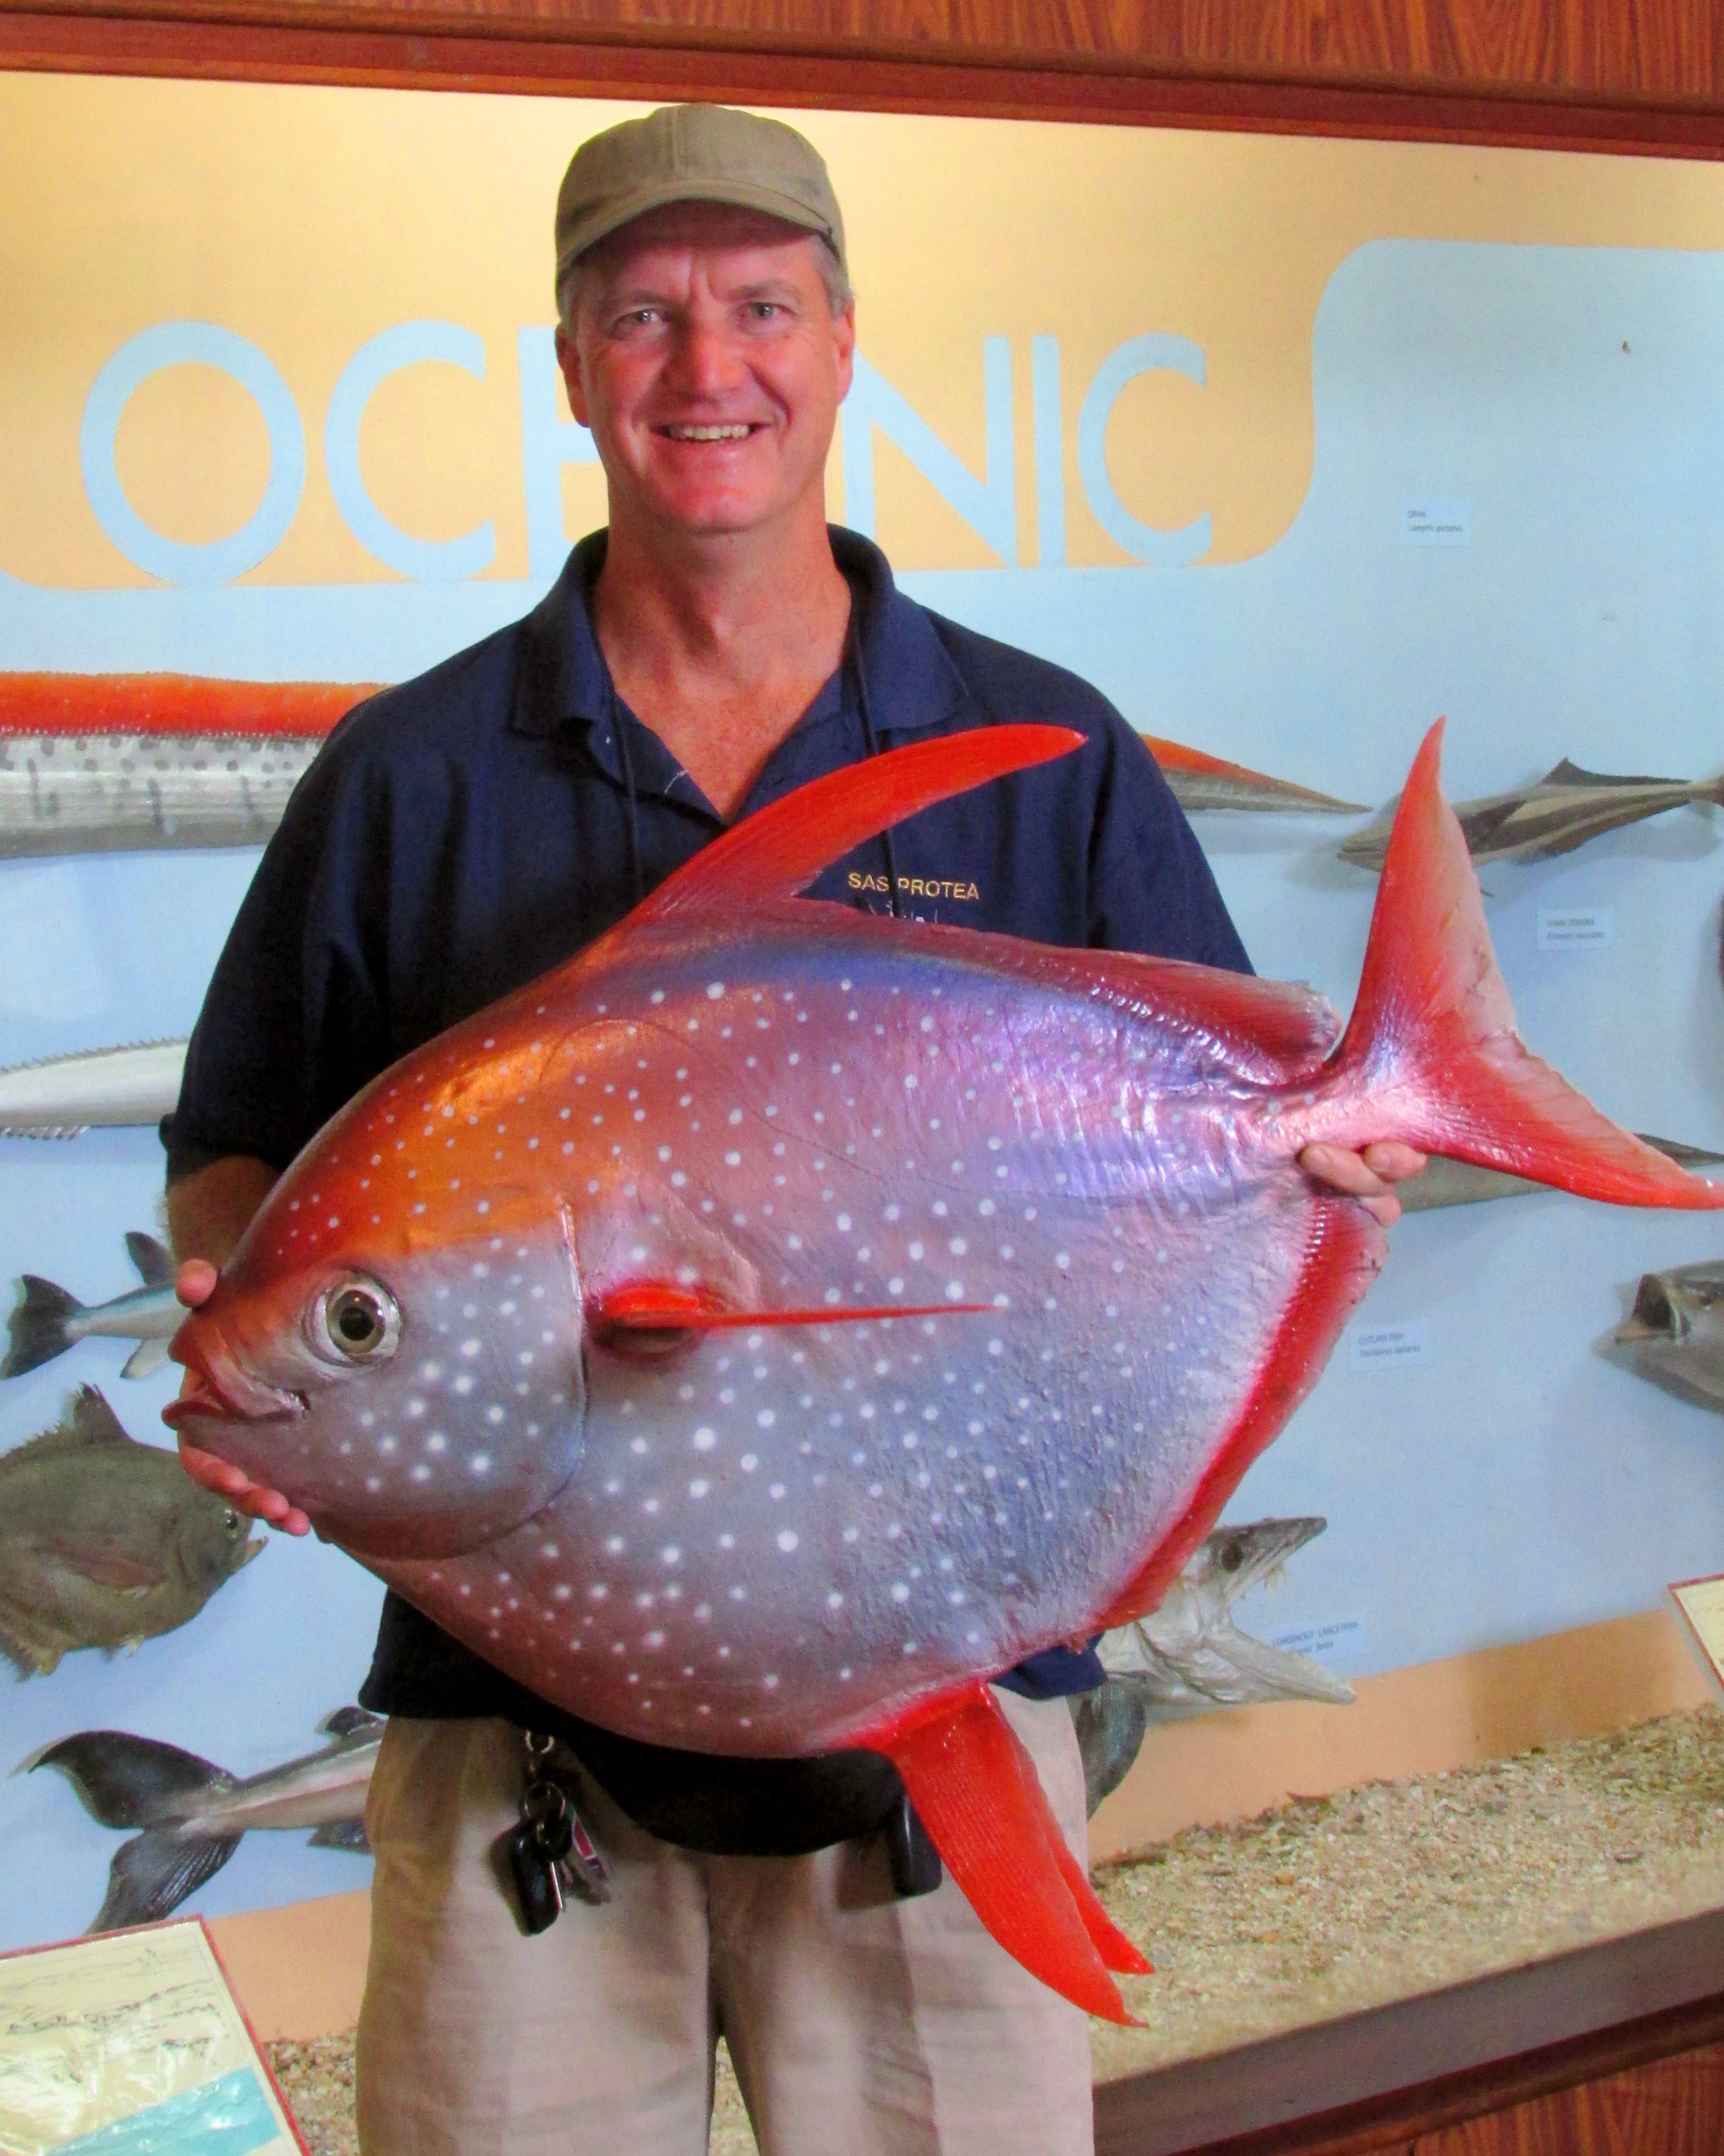 Not all fish are cold blooded – science tells the story of the warm-blooded  opah fish | elmuseumscience